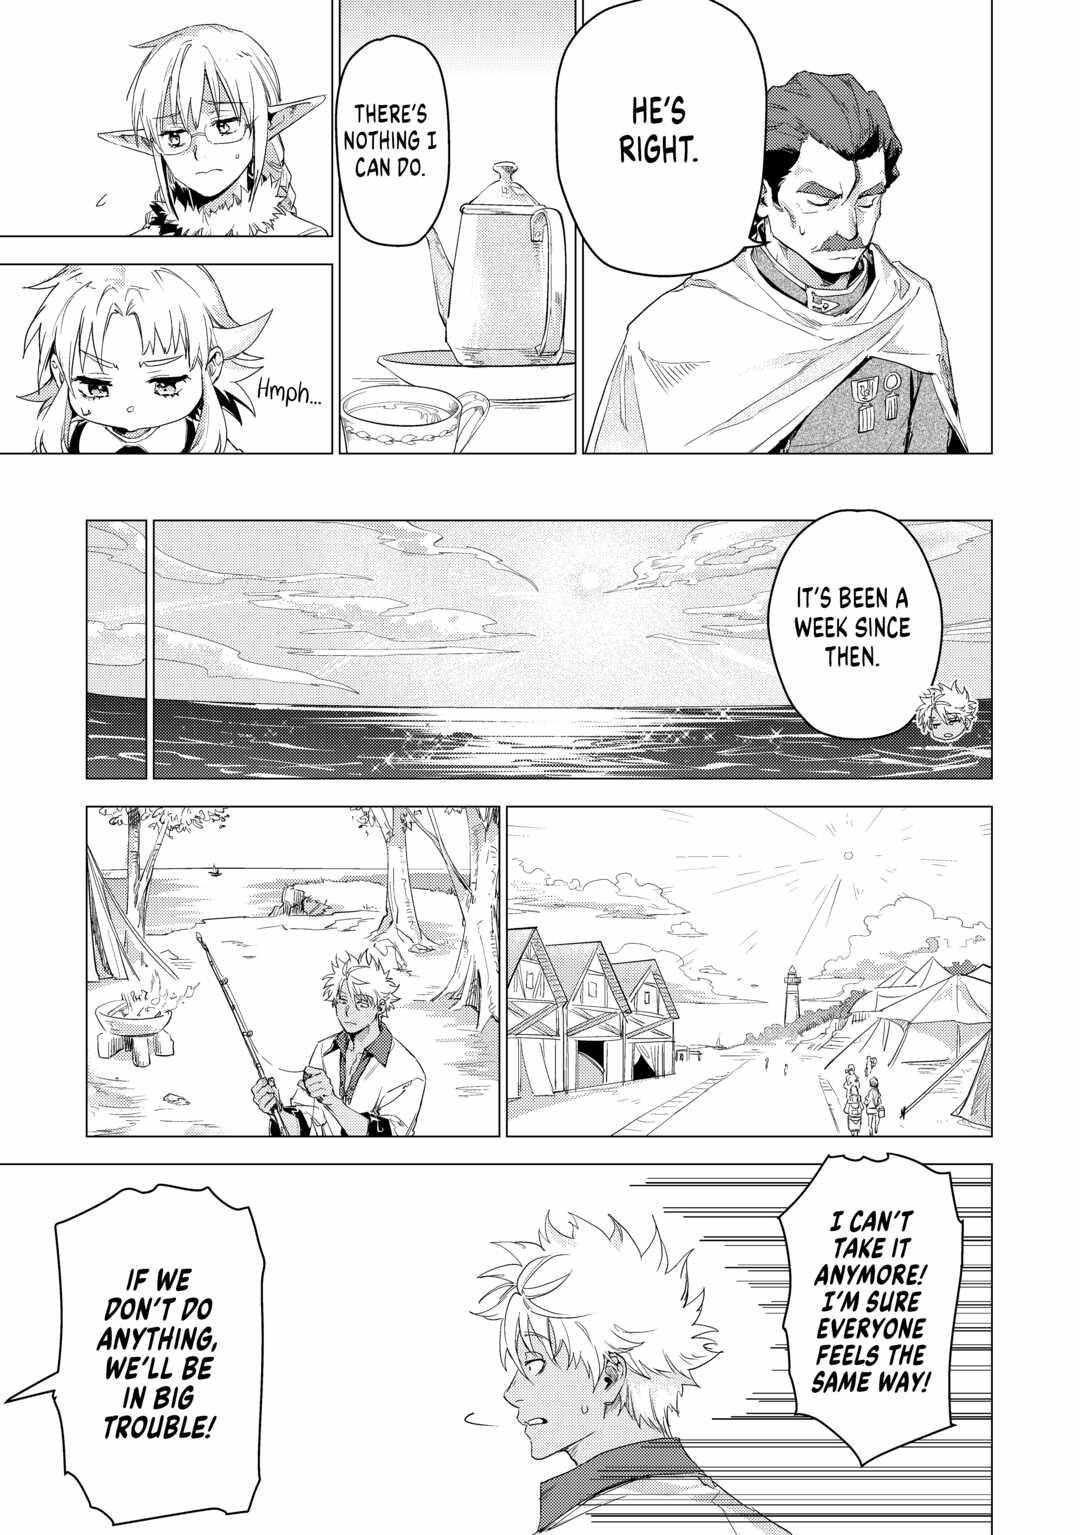 An Oldman In Counterworld. - 50 page 26-22807956